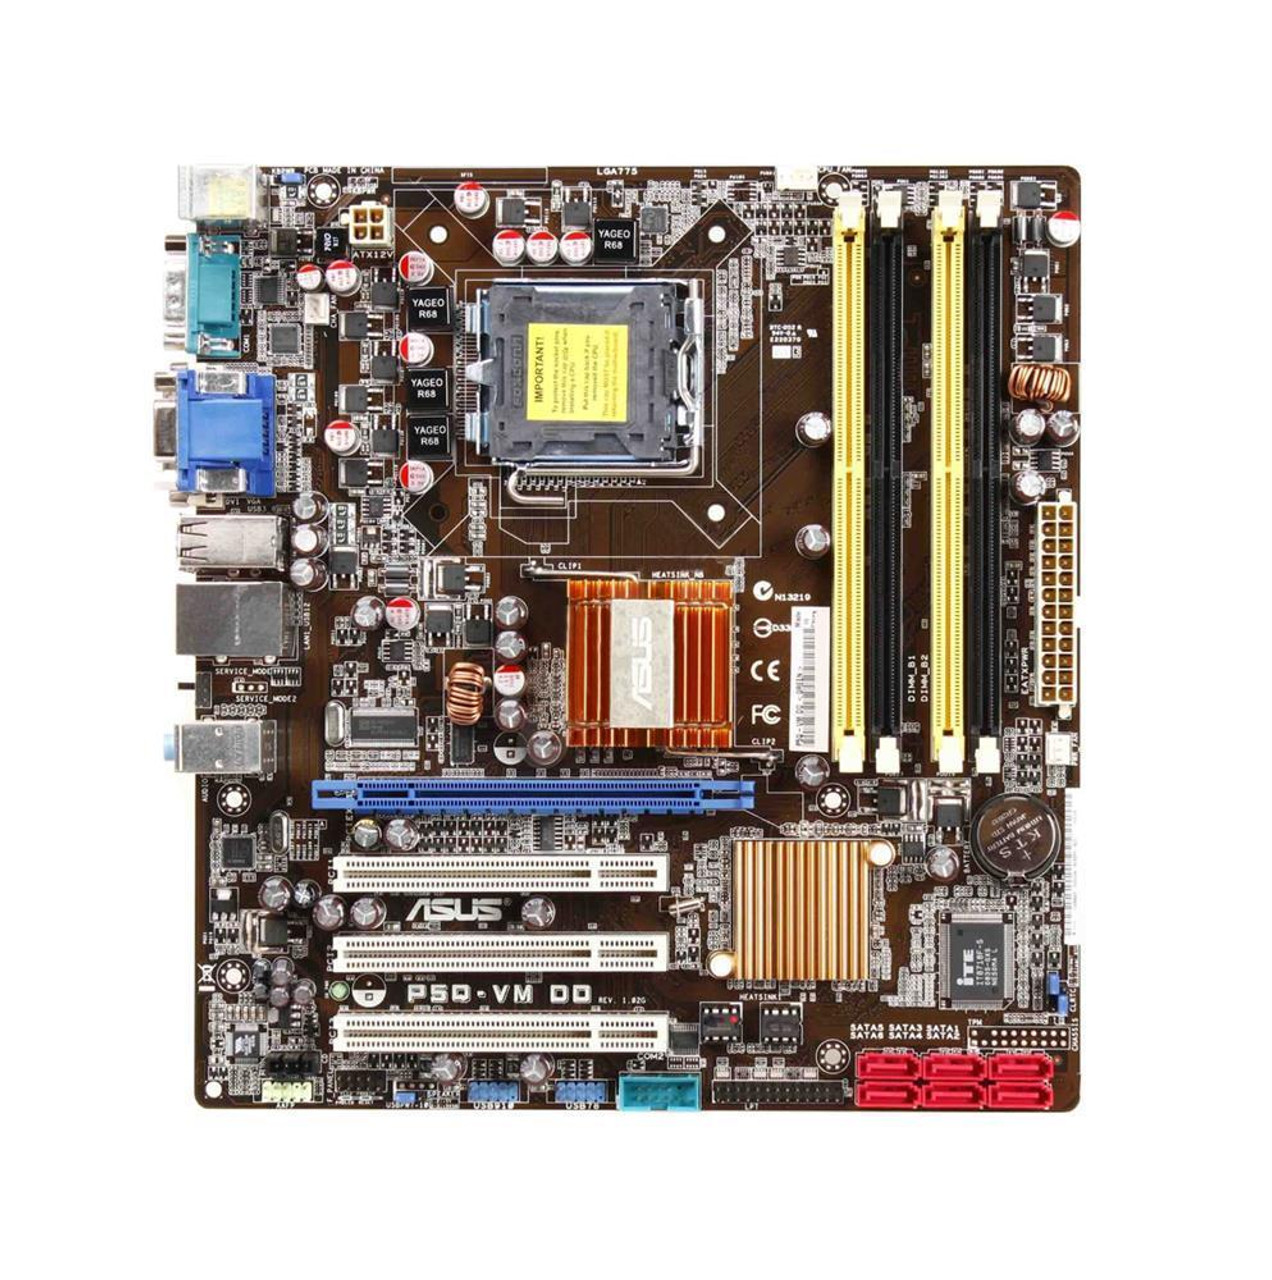 P5Q-VMDO ASUS P5Q-VM DO Socket LGA775 Intel Q45/ICH10DO Chipset micro-ATX Motherboard (Refurbished)